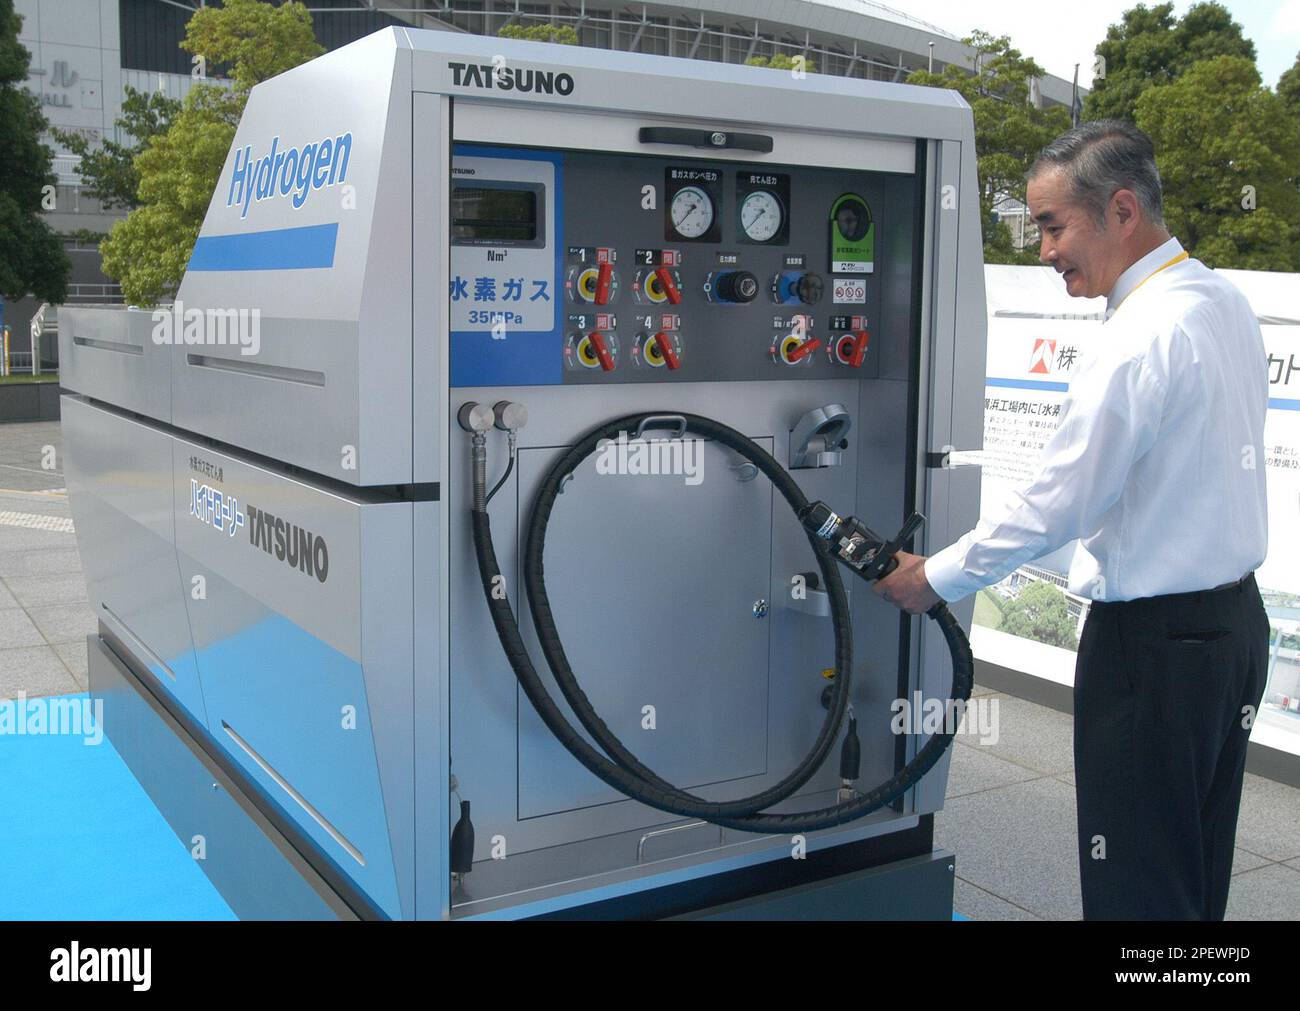 A mobile hydrogen dispenser, manufactured by gasoline pump maker Tatsuno  Corp. in Tokyo, is shown at the World Hydrogen Energy Conference in  Yokohama, south of Tokyo Monday, June 28, 2004. The device